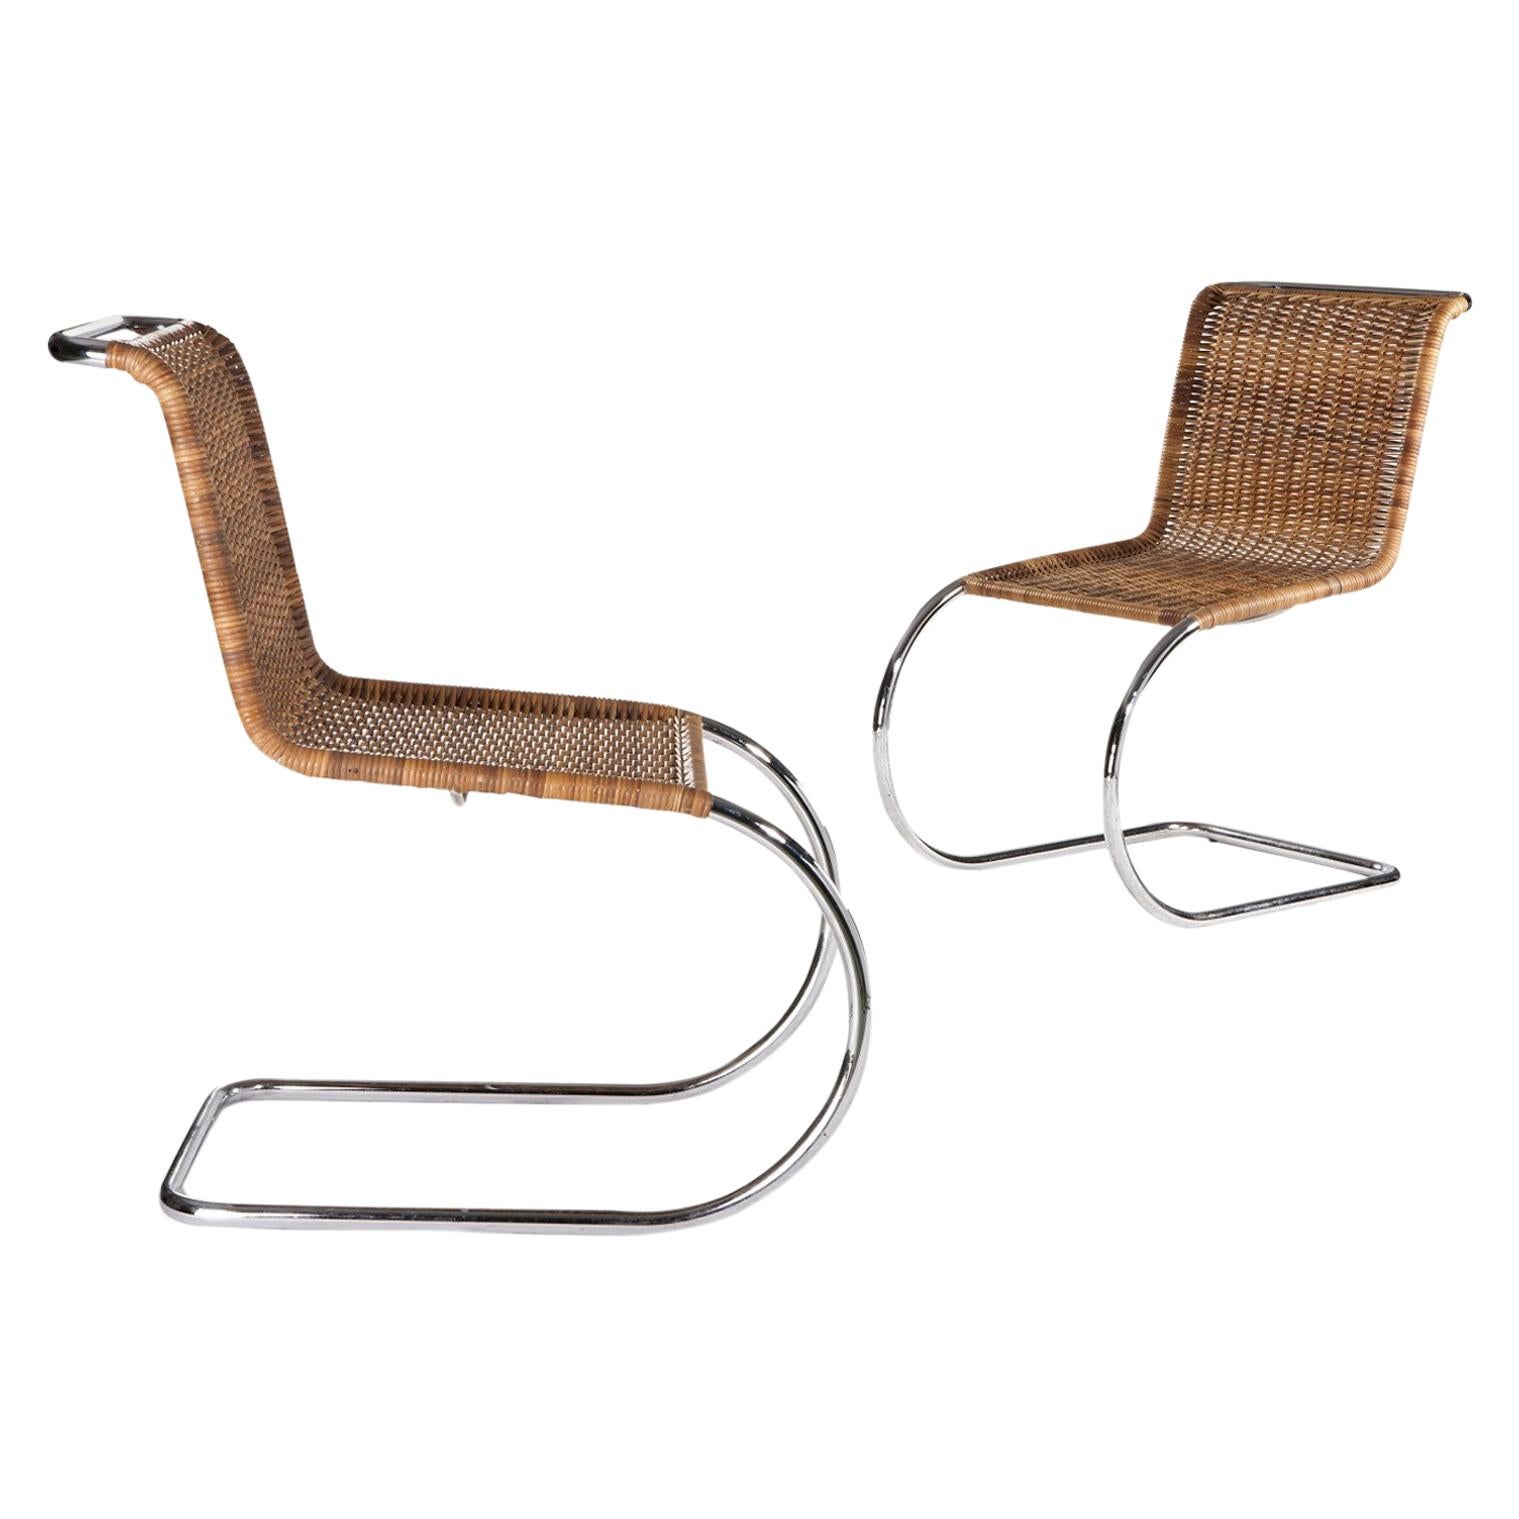 Ludwig Mies van der Rohe Woven Cane Armless MR 10 Chairs for Alivar, 1980